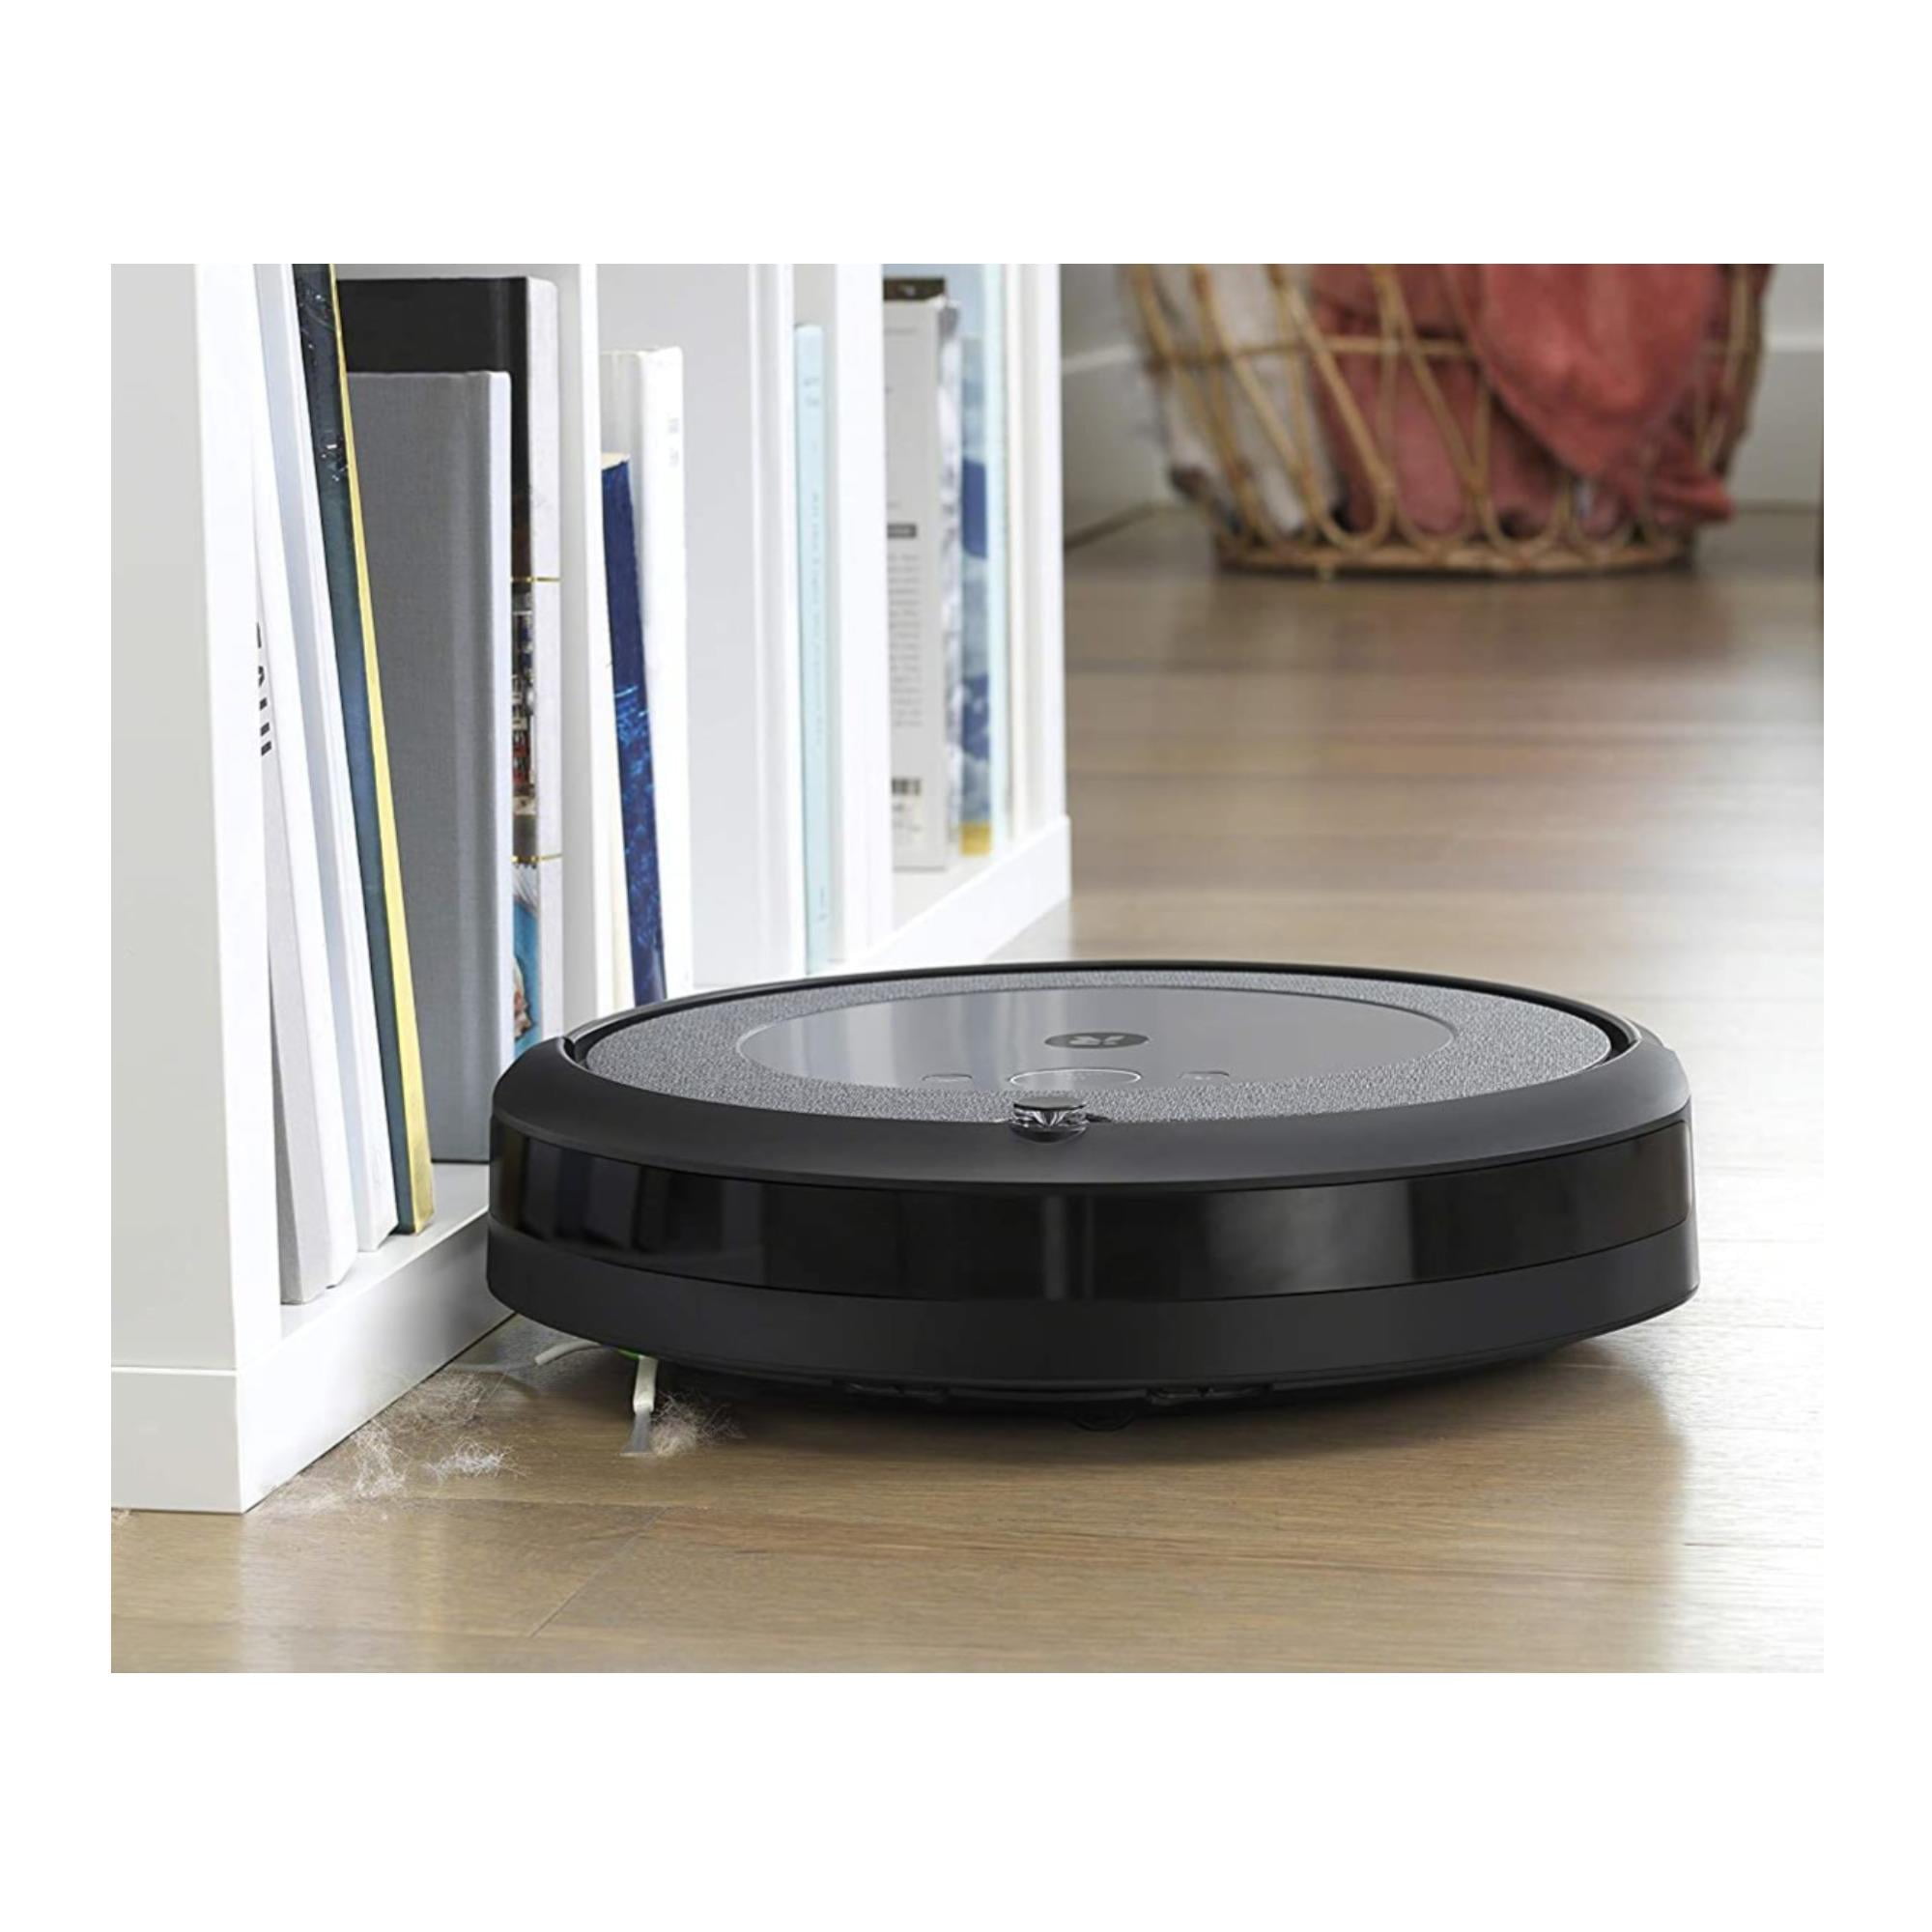 Roomba i3 (3150) Wi-Fi Connected Robot Vacuum with Virtual Wall Barrier Walmart.com